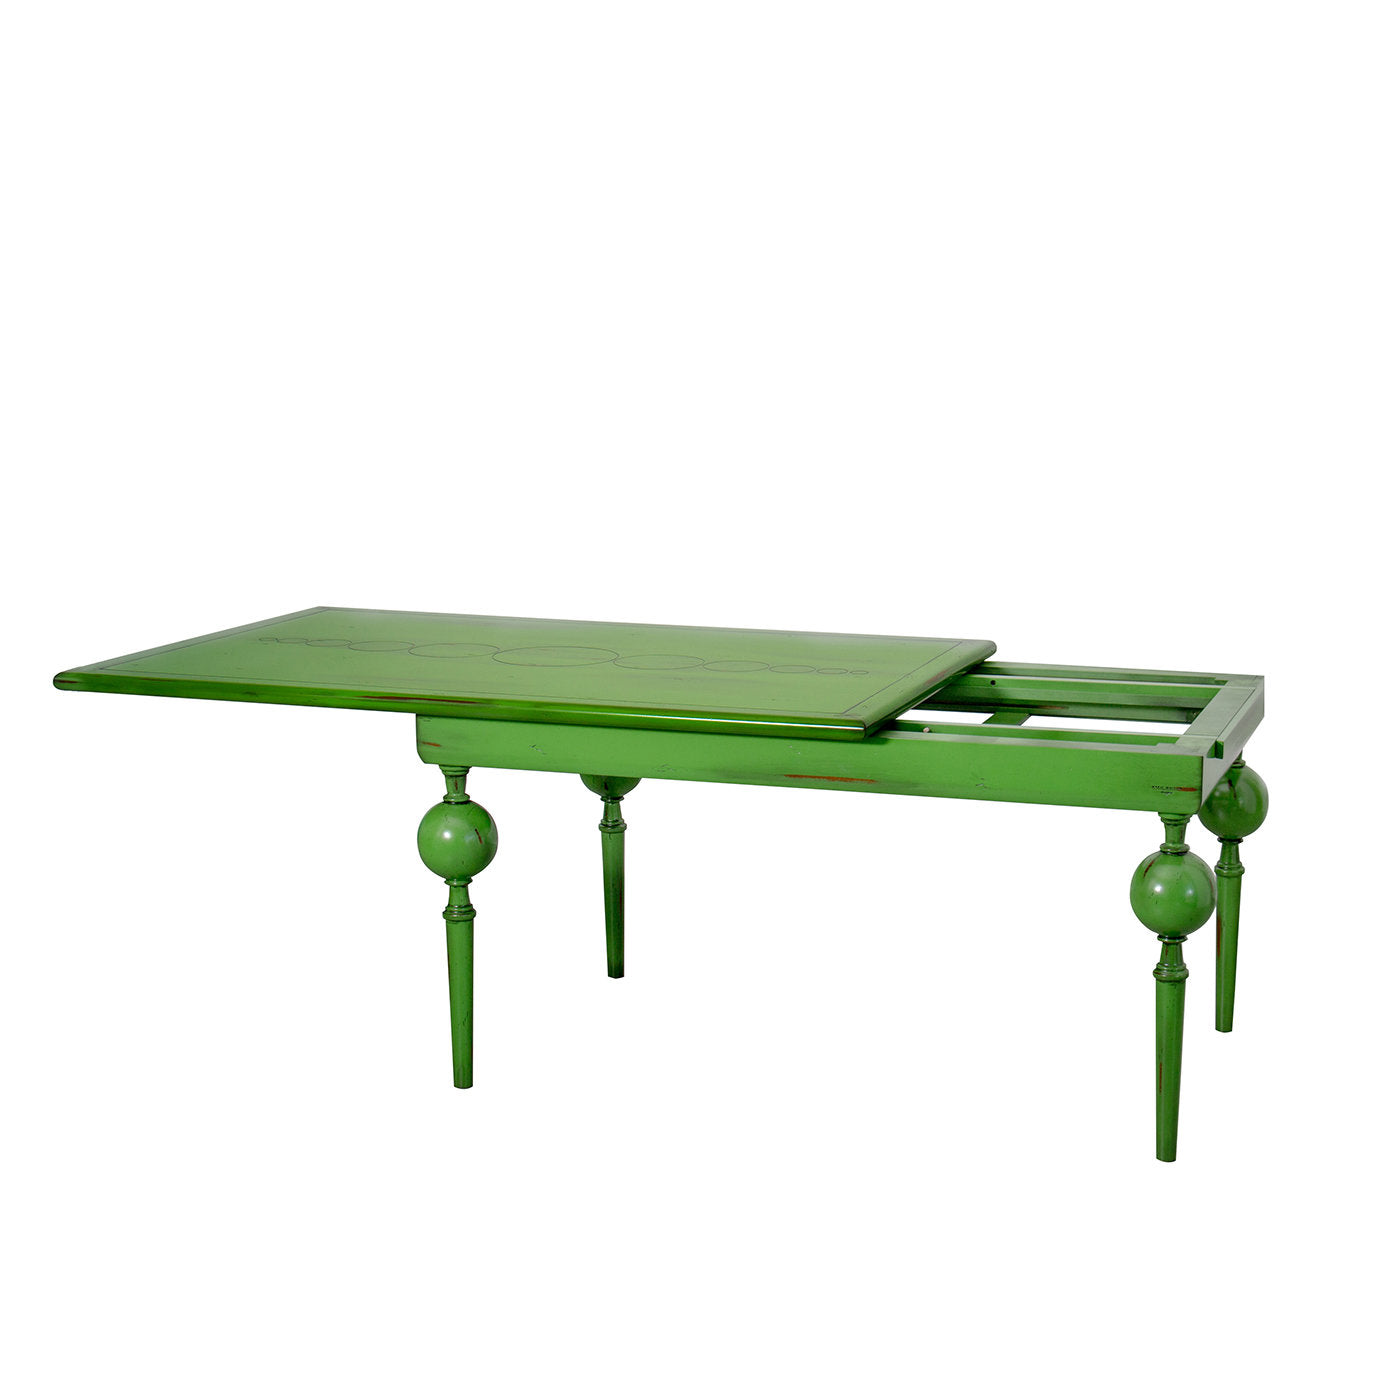 Le Bolle Extendable Table - Alternative view 3